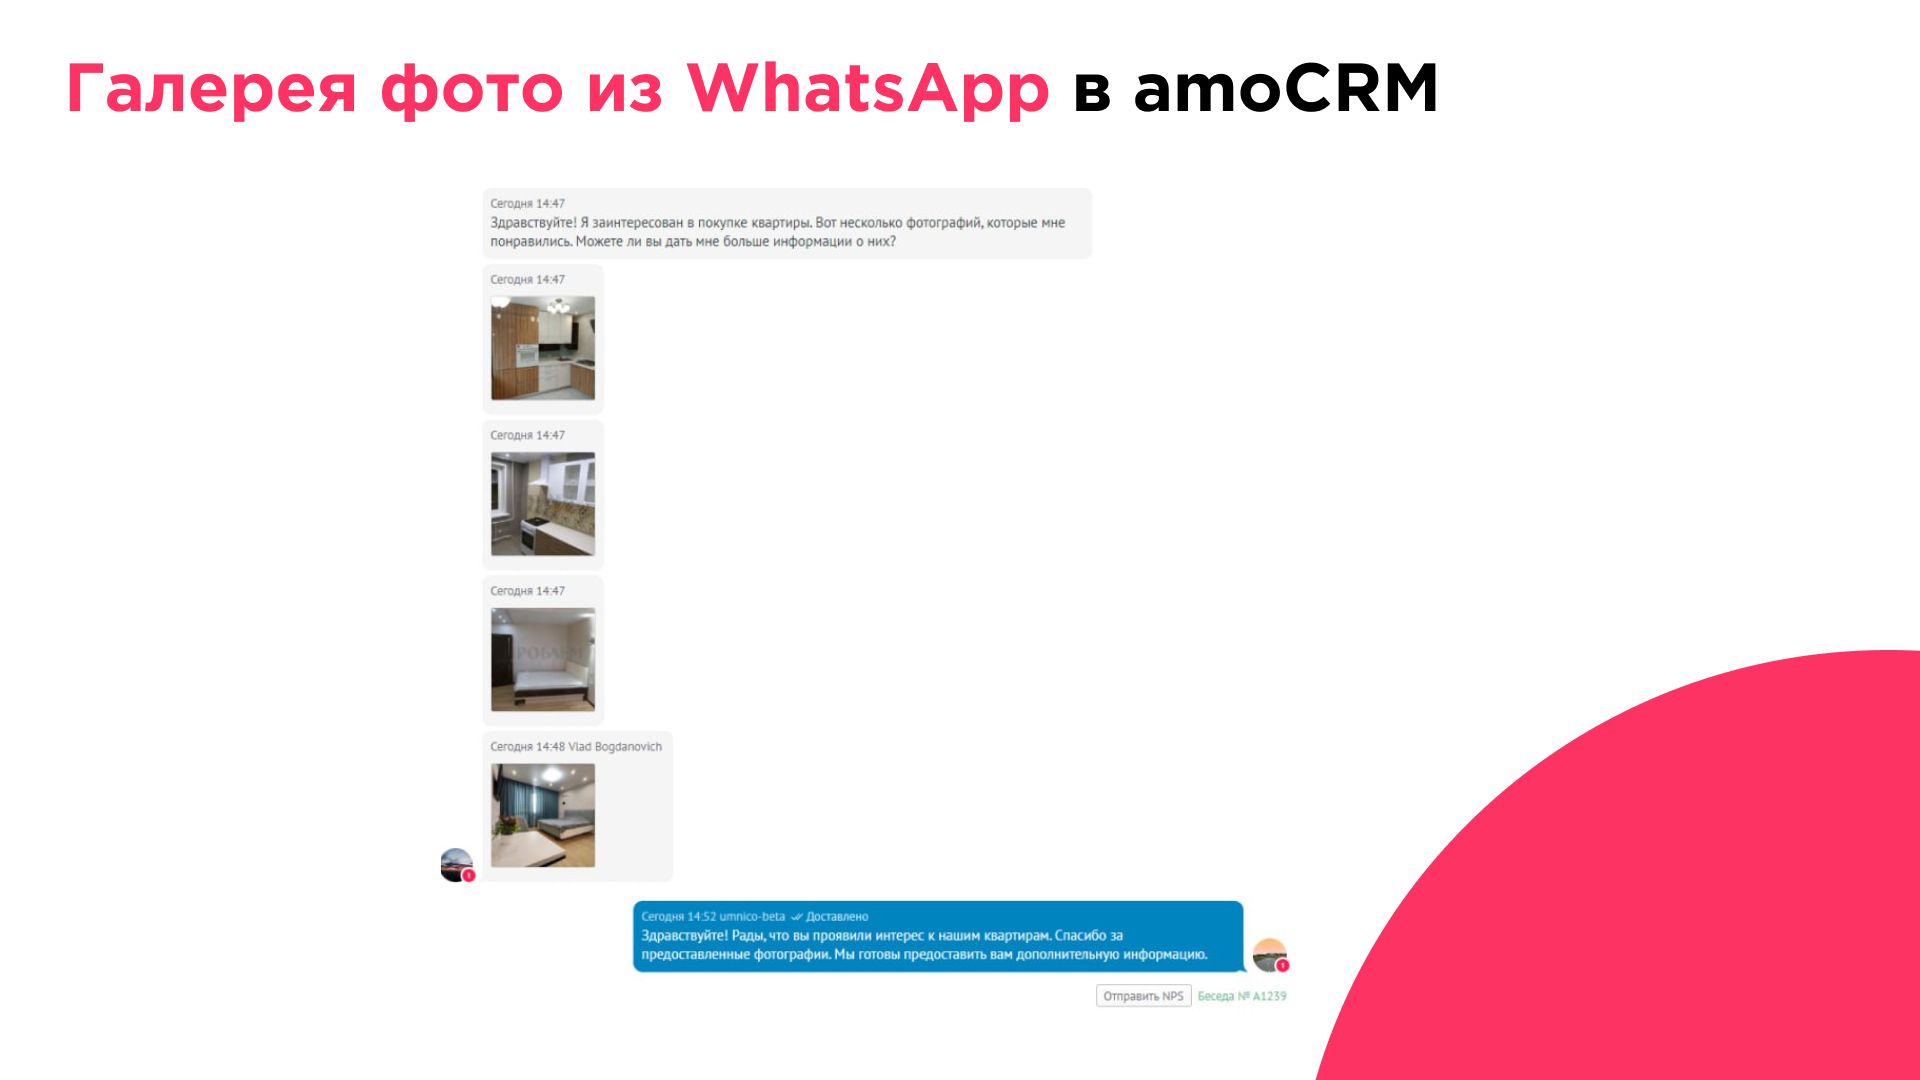 Photo sets sent through WhatsApp now in amoCRM